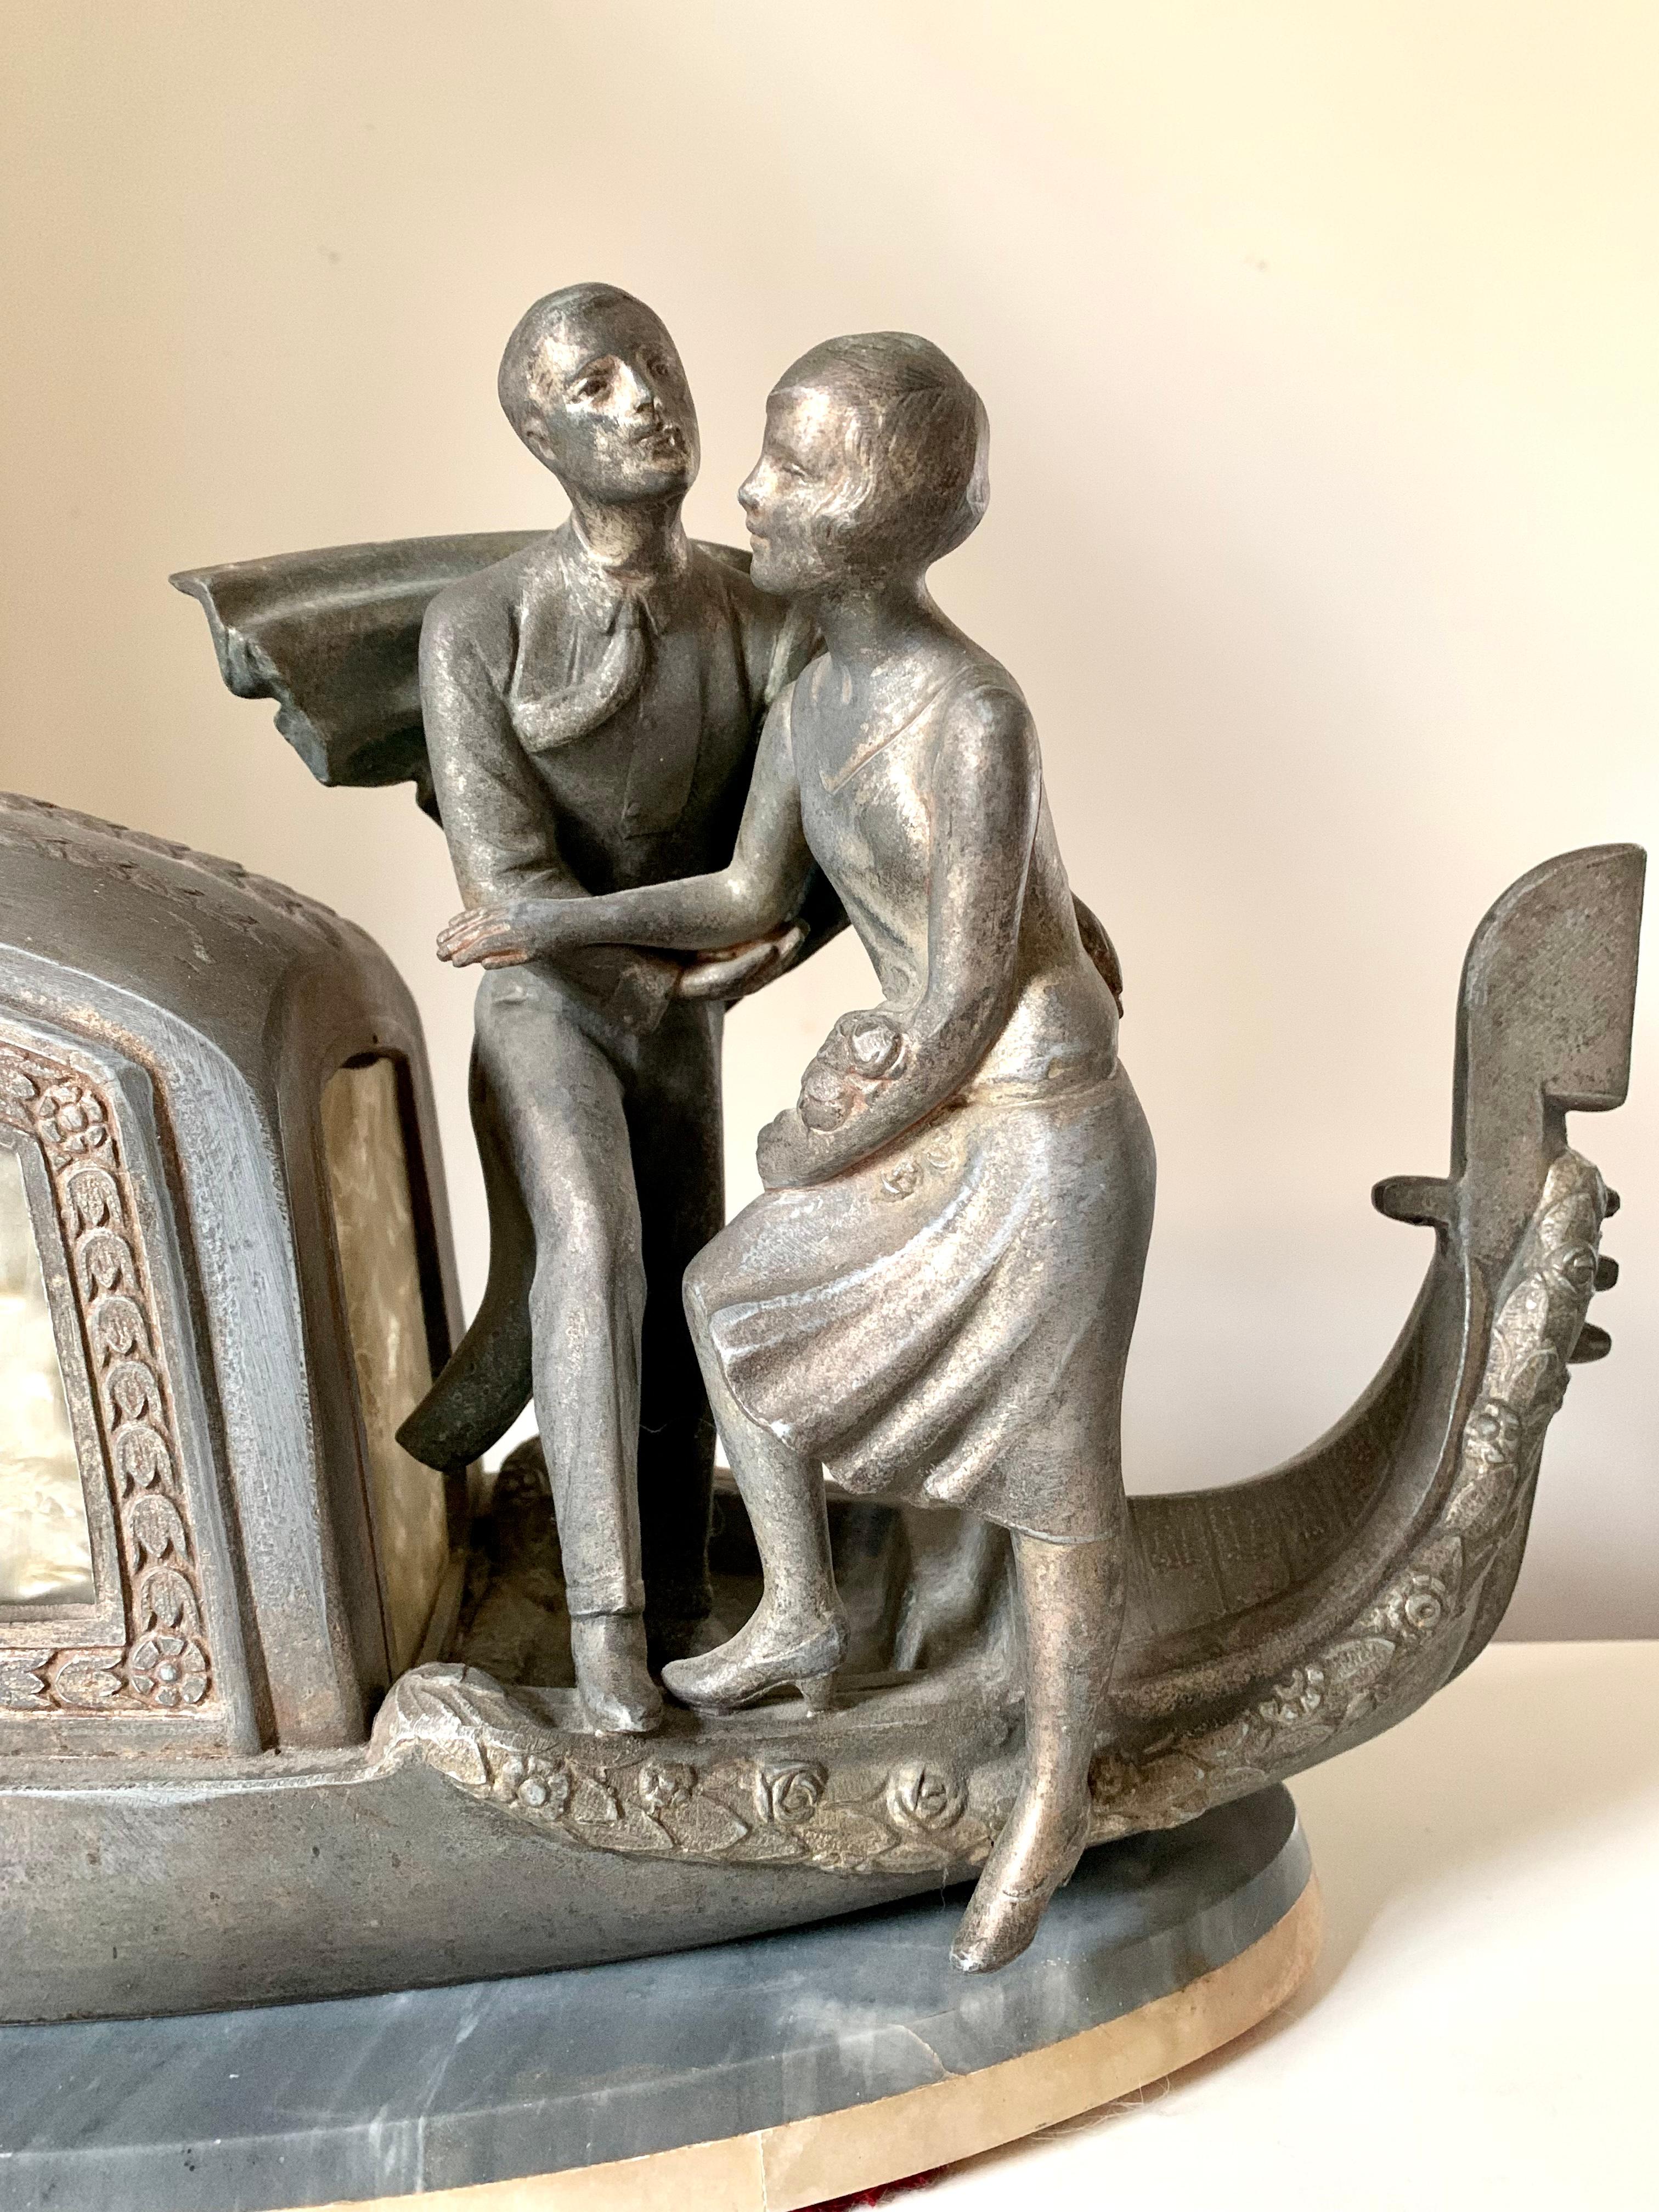 A silvered Venetian goldola, a handsome smiling gondolier, a beautiful couple embarking on a romantic voyage, a fabulous French Art Deco period lamp by Pierre Sega.
Circa 1920
Silvered metal, Saint Anne marble, Honey onyx, celluloid panels
The